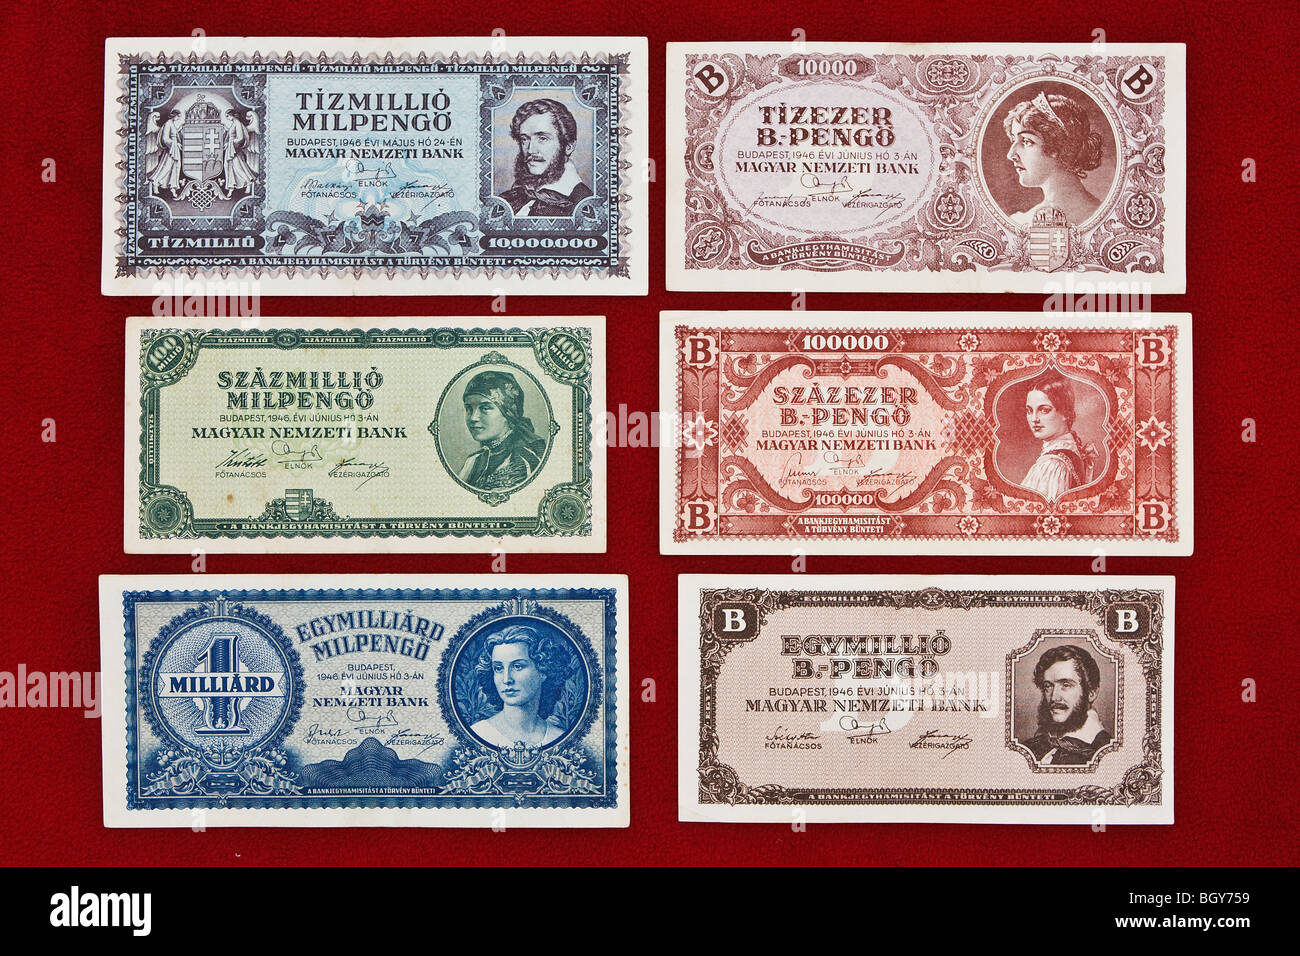 Some of the highest denominations from the Hungarian hyperinflation in 1945-46. Stock Photo